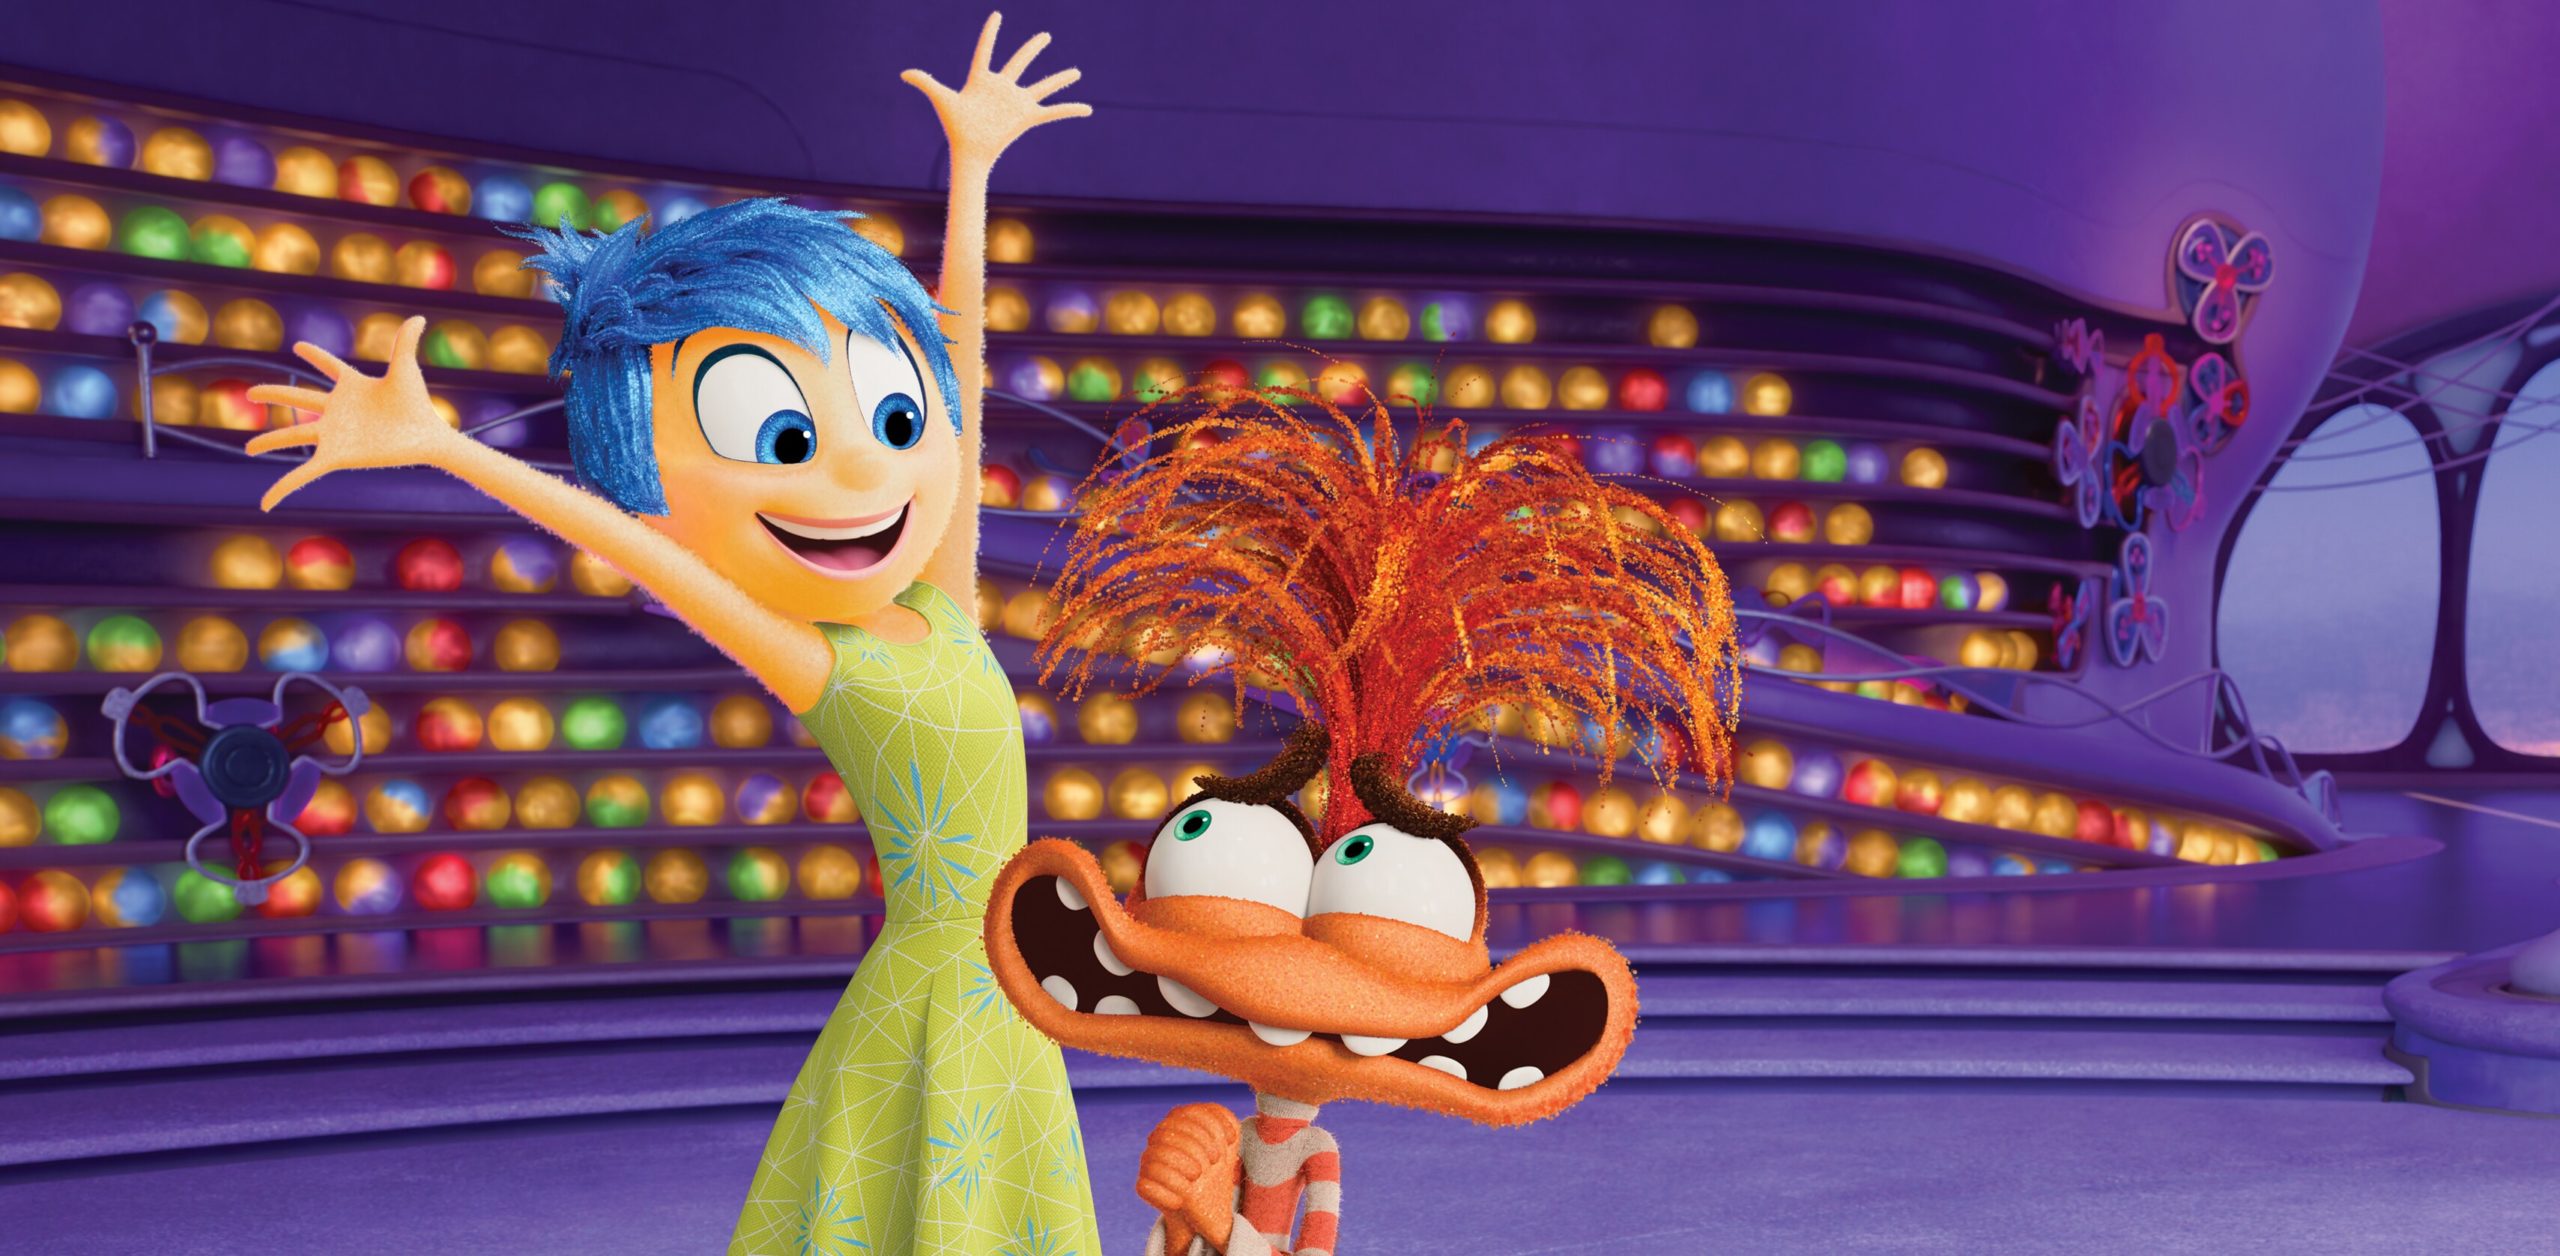 Joy and Anxiety's fragile relationship summarized in one image in Inside Out 2.